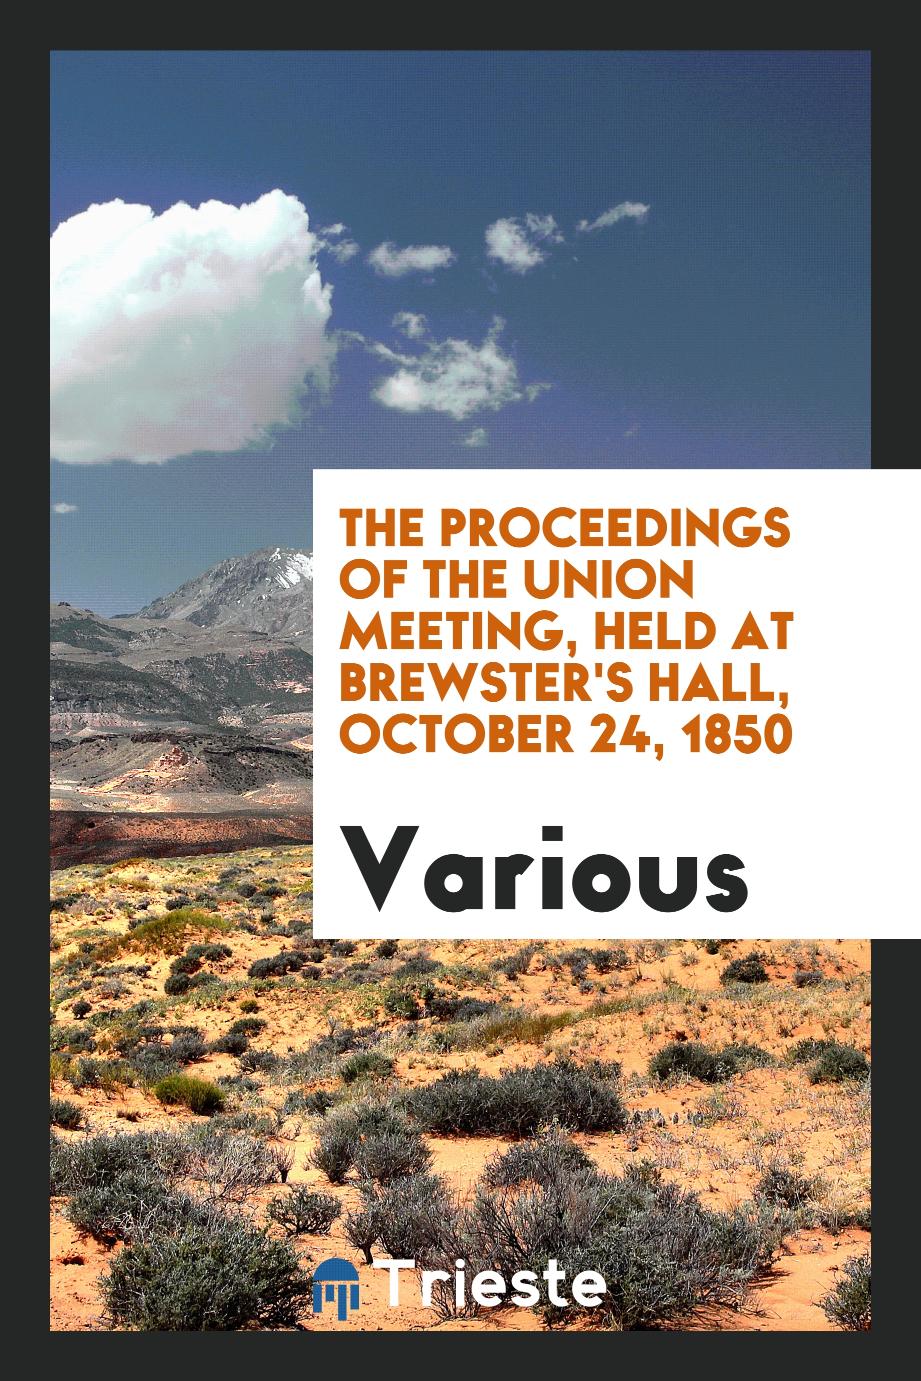 The proceedings of the Union meeting, held at Brewster's hall, October 24, 1850